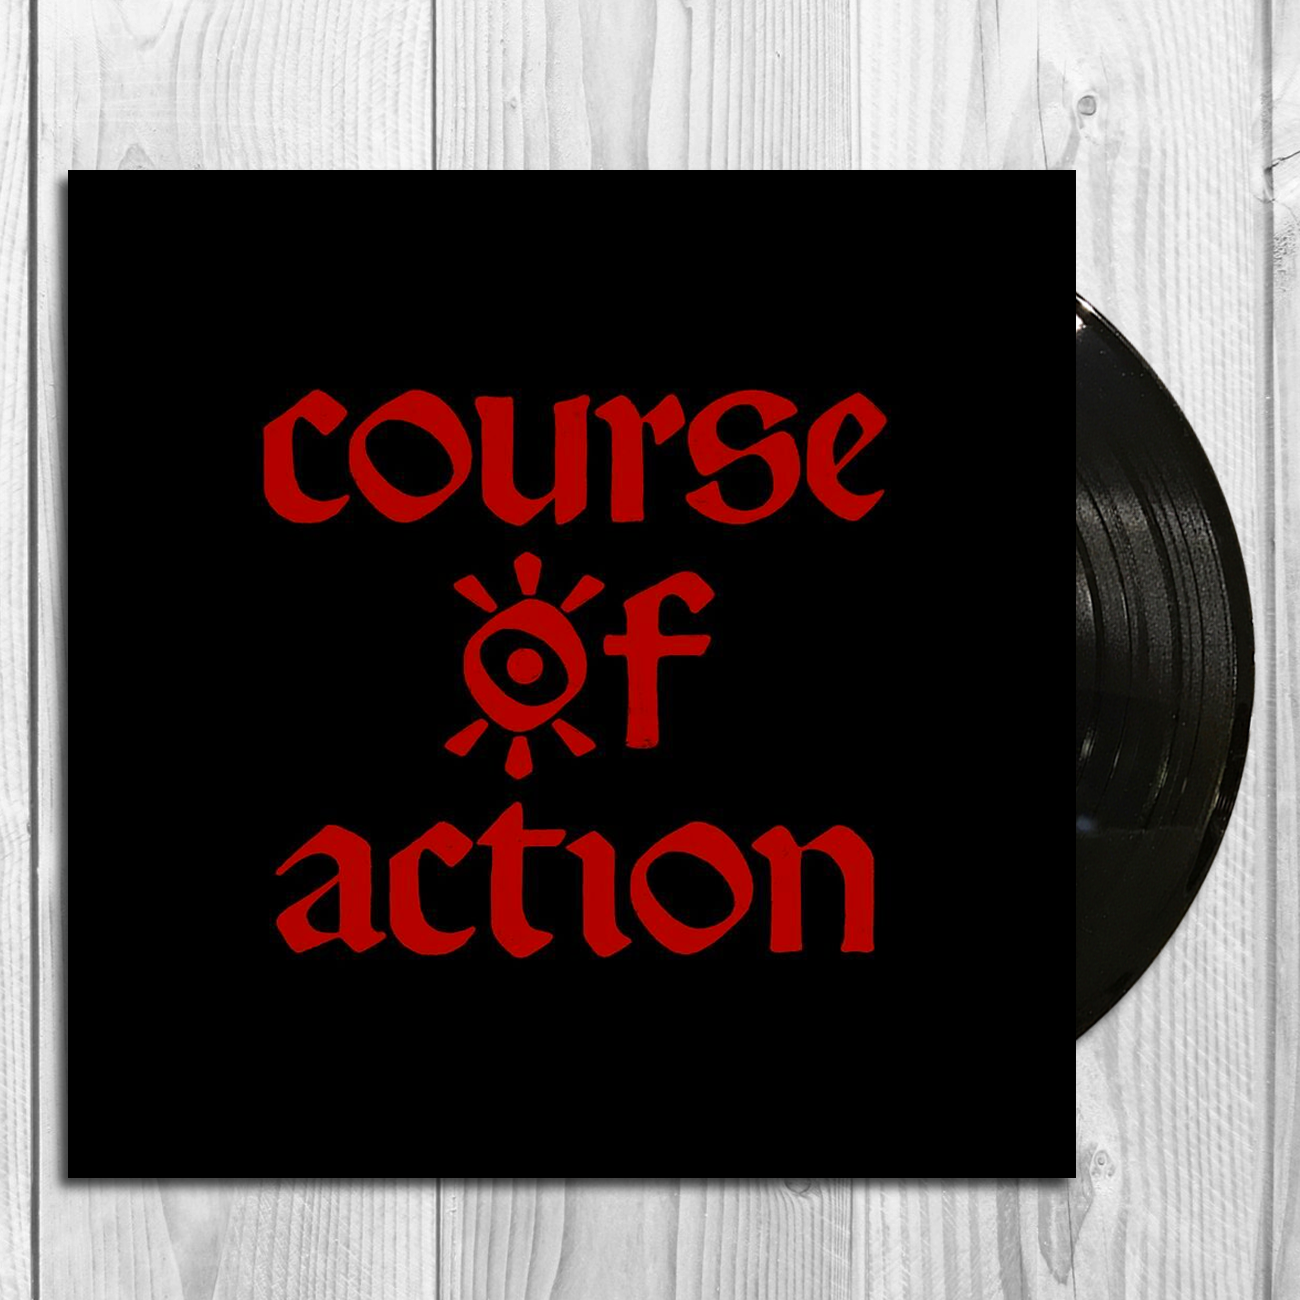 Mind Rays - Course of Action LP